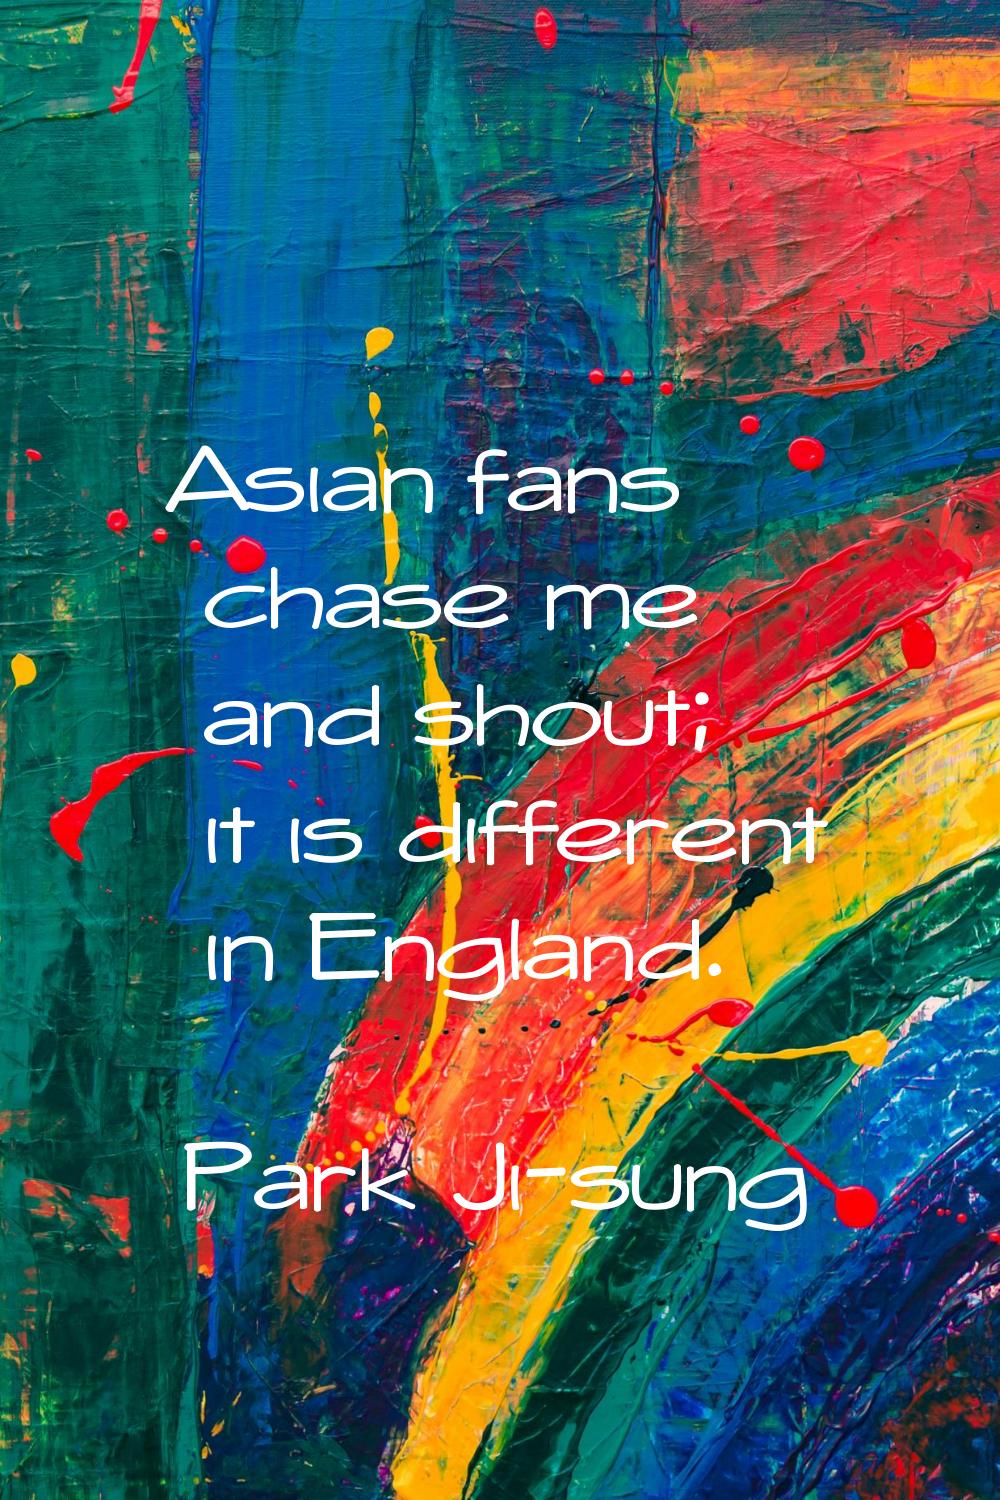 Asian fans chase me and shout; it is different in England.